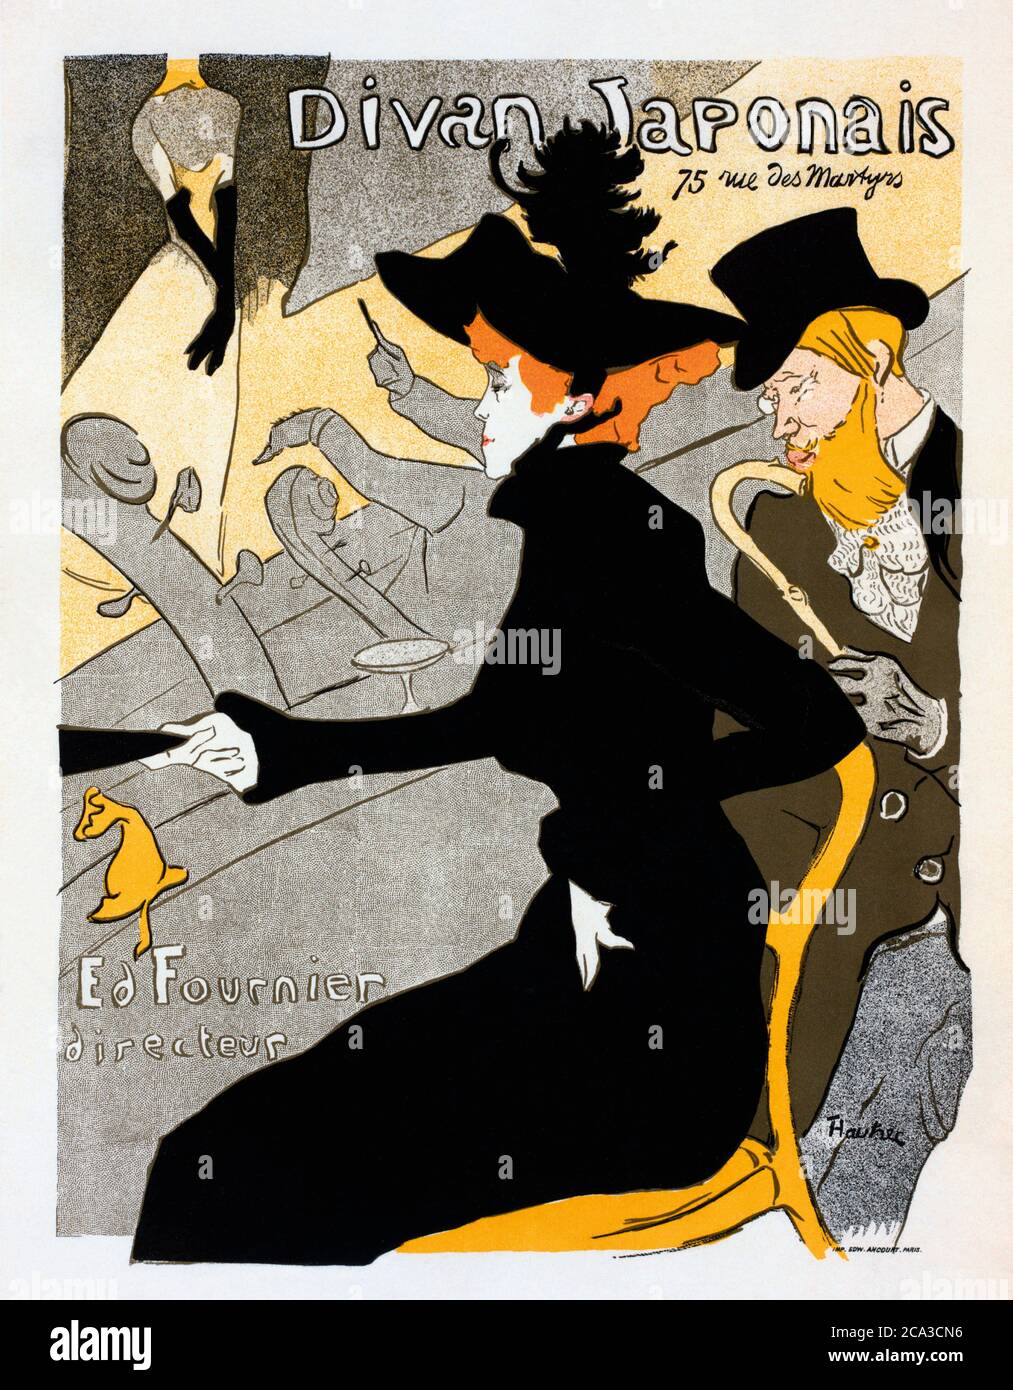 Divan Japonais. Poster, dated circa 1893-1894 by French artist Henri de Toulouse-Lautrec, 1864-1901. The poster was designed as an advertisement for Stock Photo